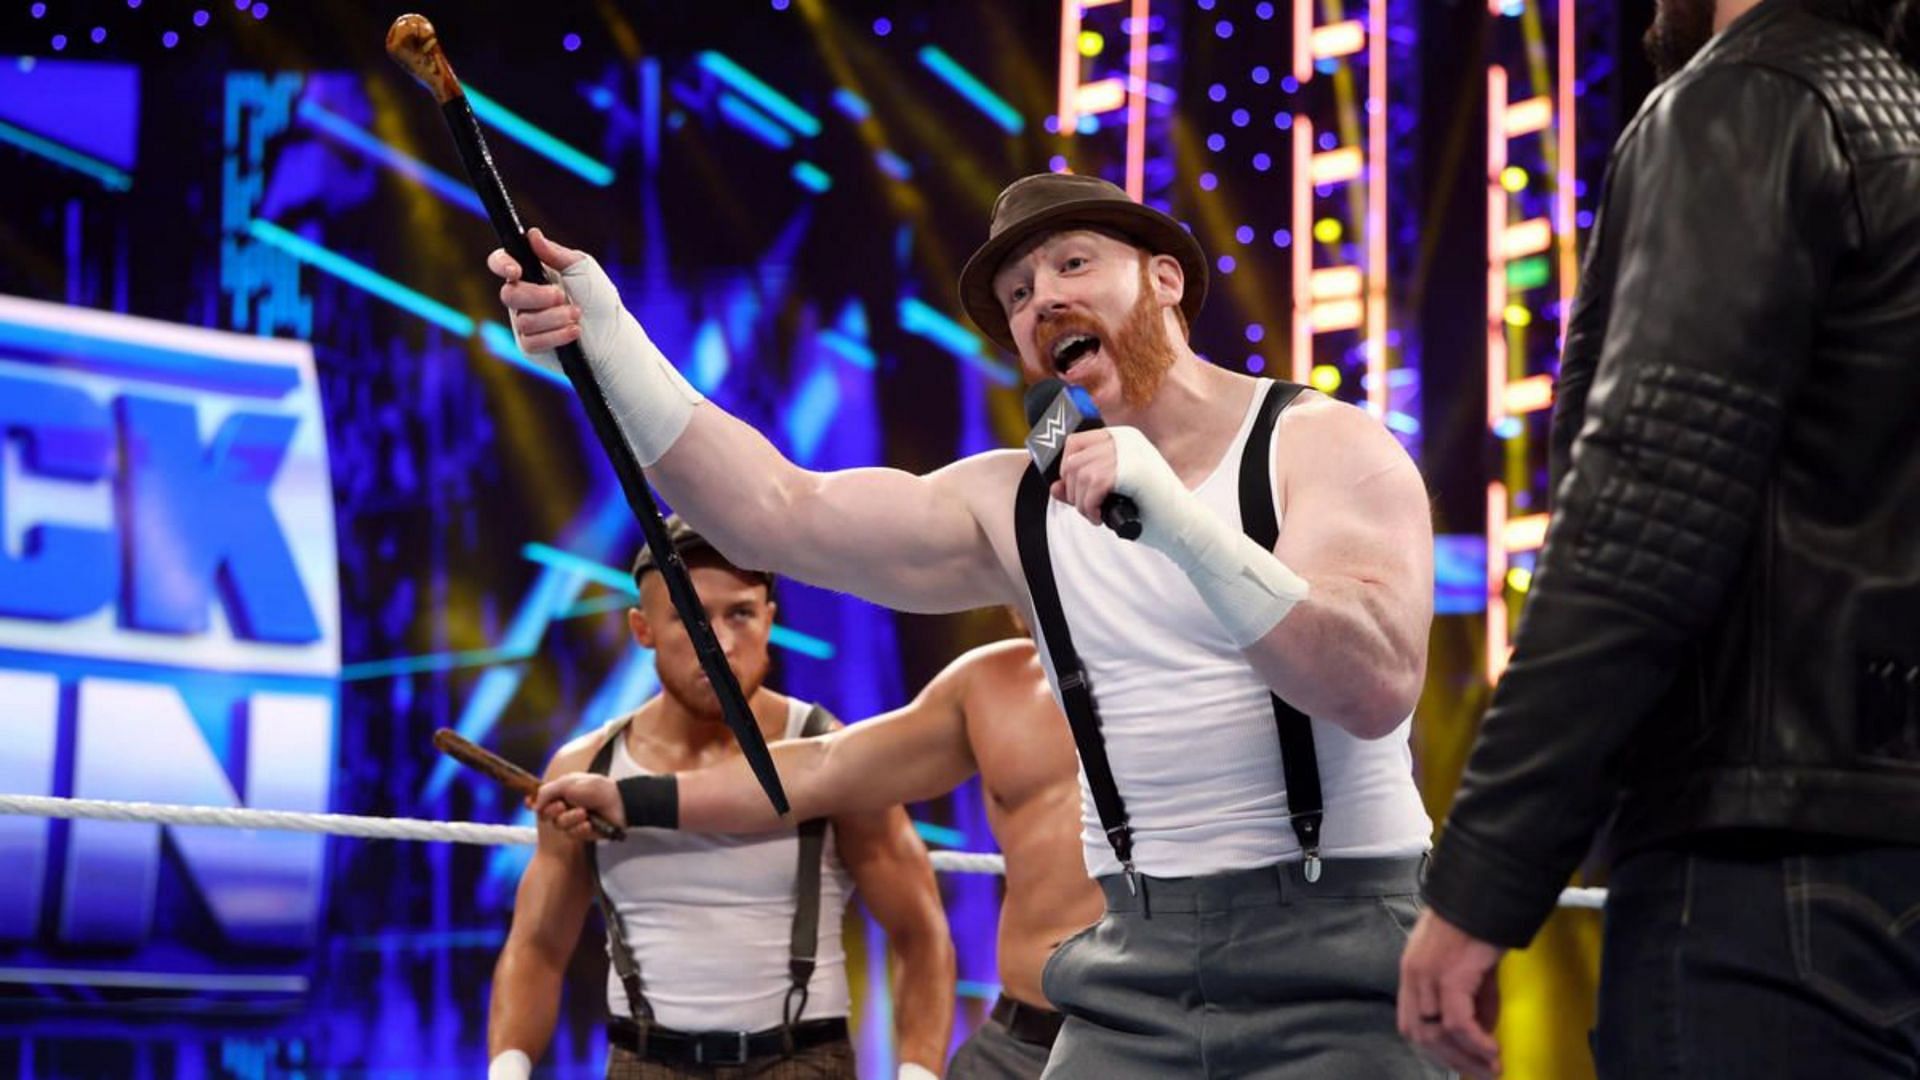 Sheamus is currently active on SmackDown